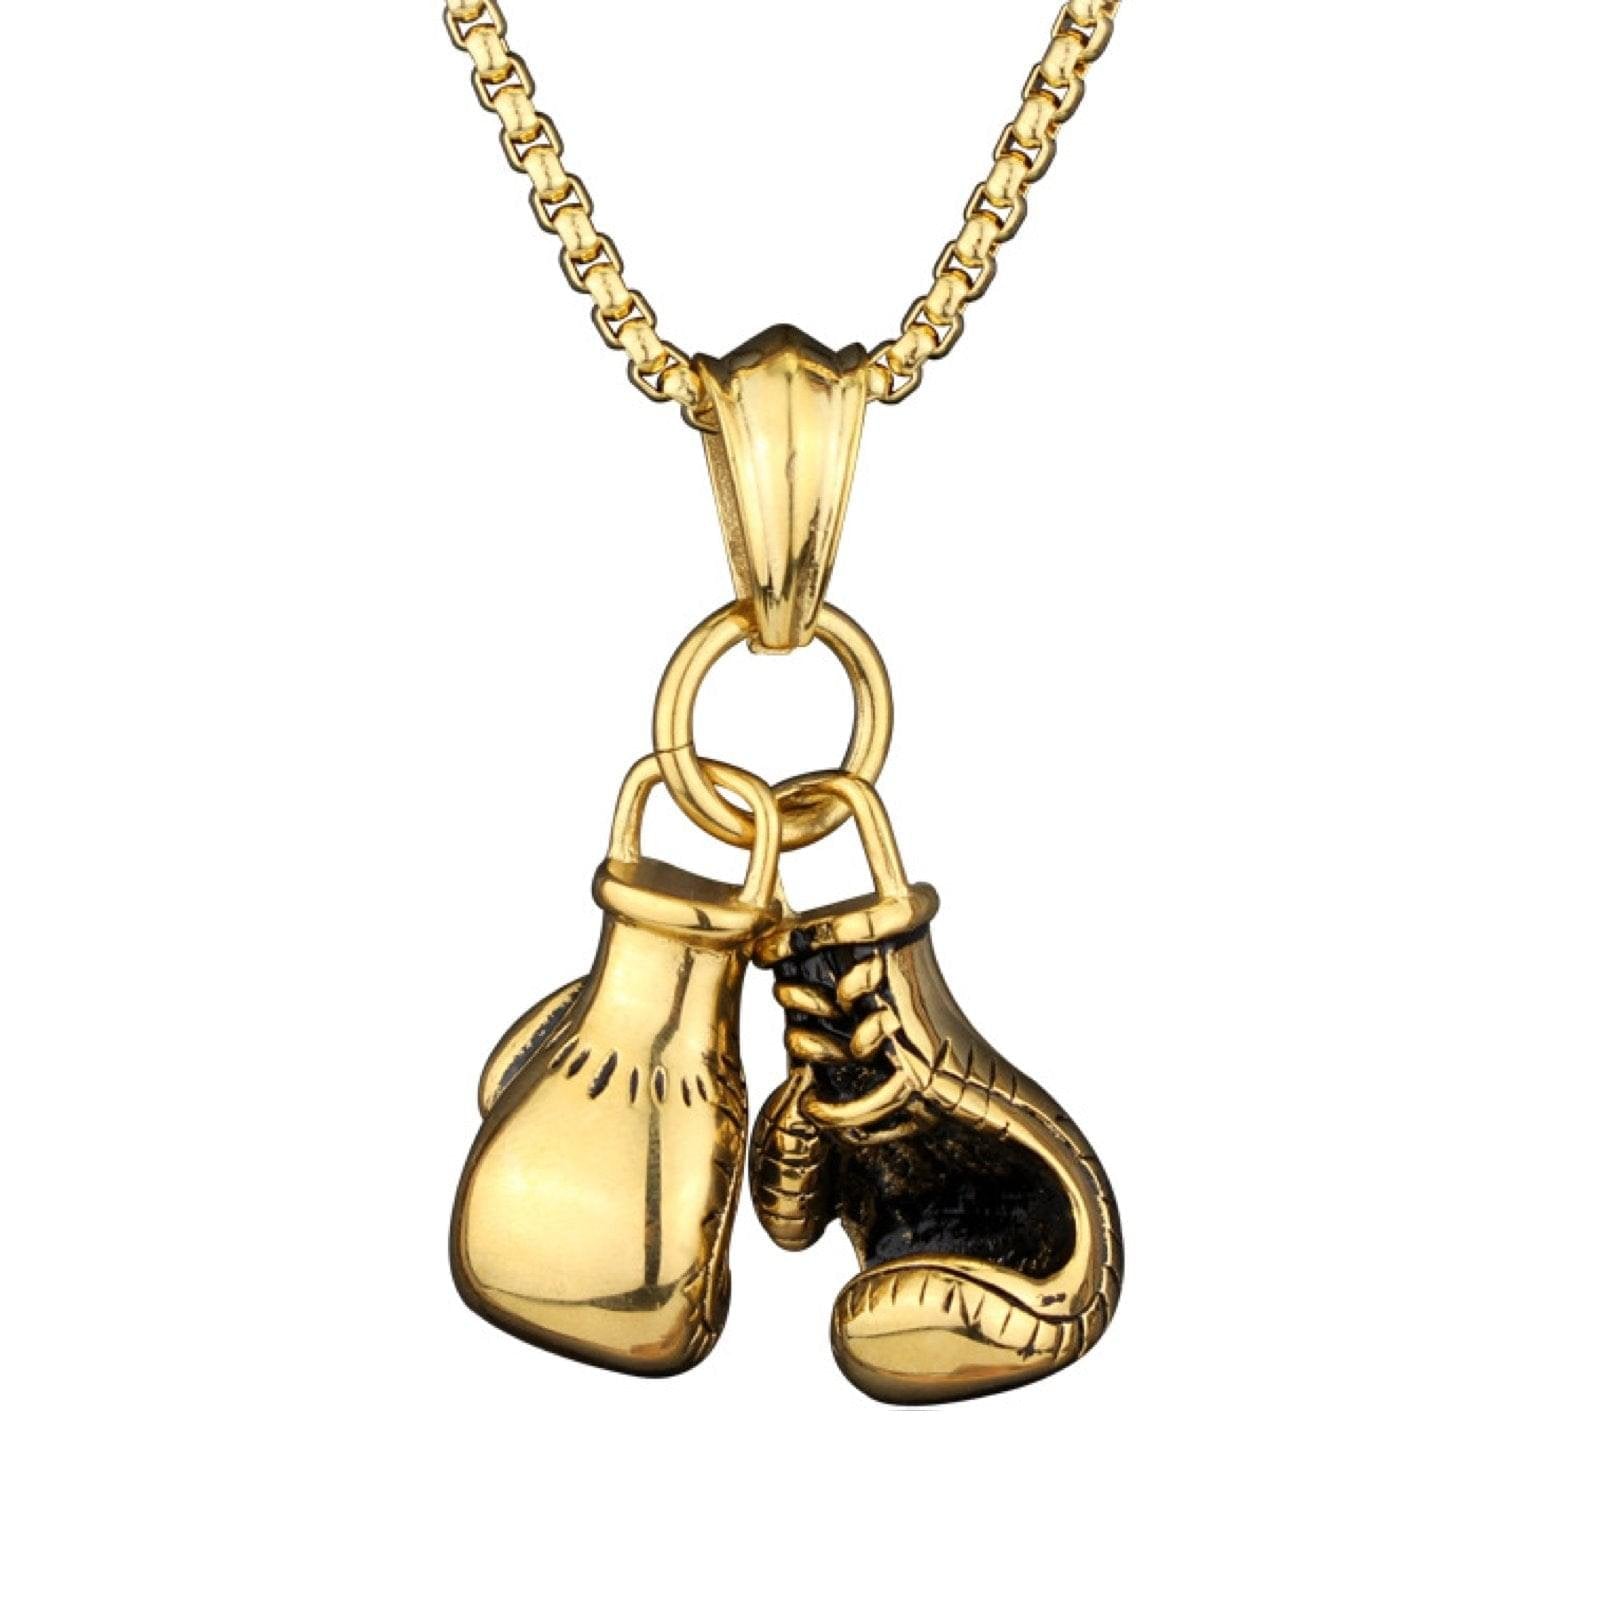 Boxing Gloves Pendant and Chain Necklace-SLVR-BXG-GLVS-24